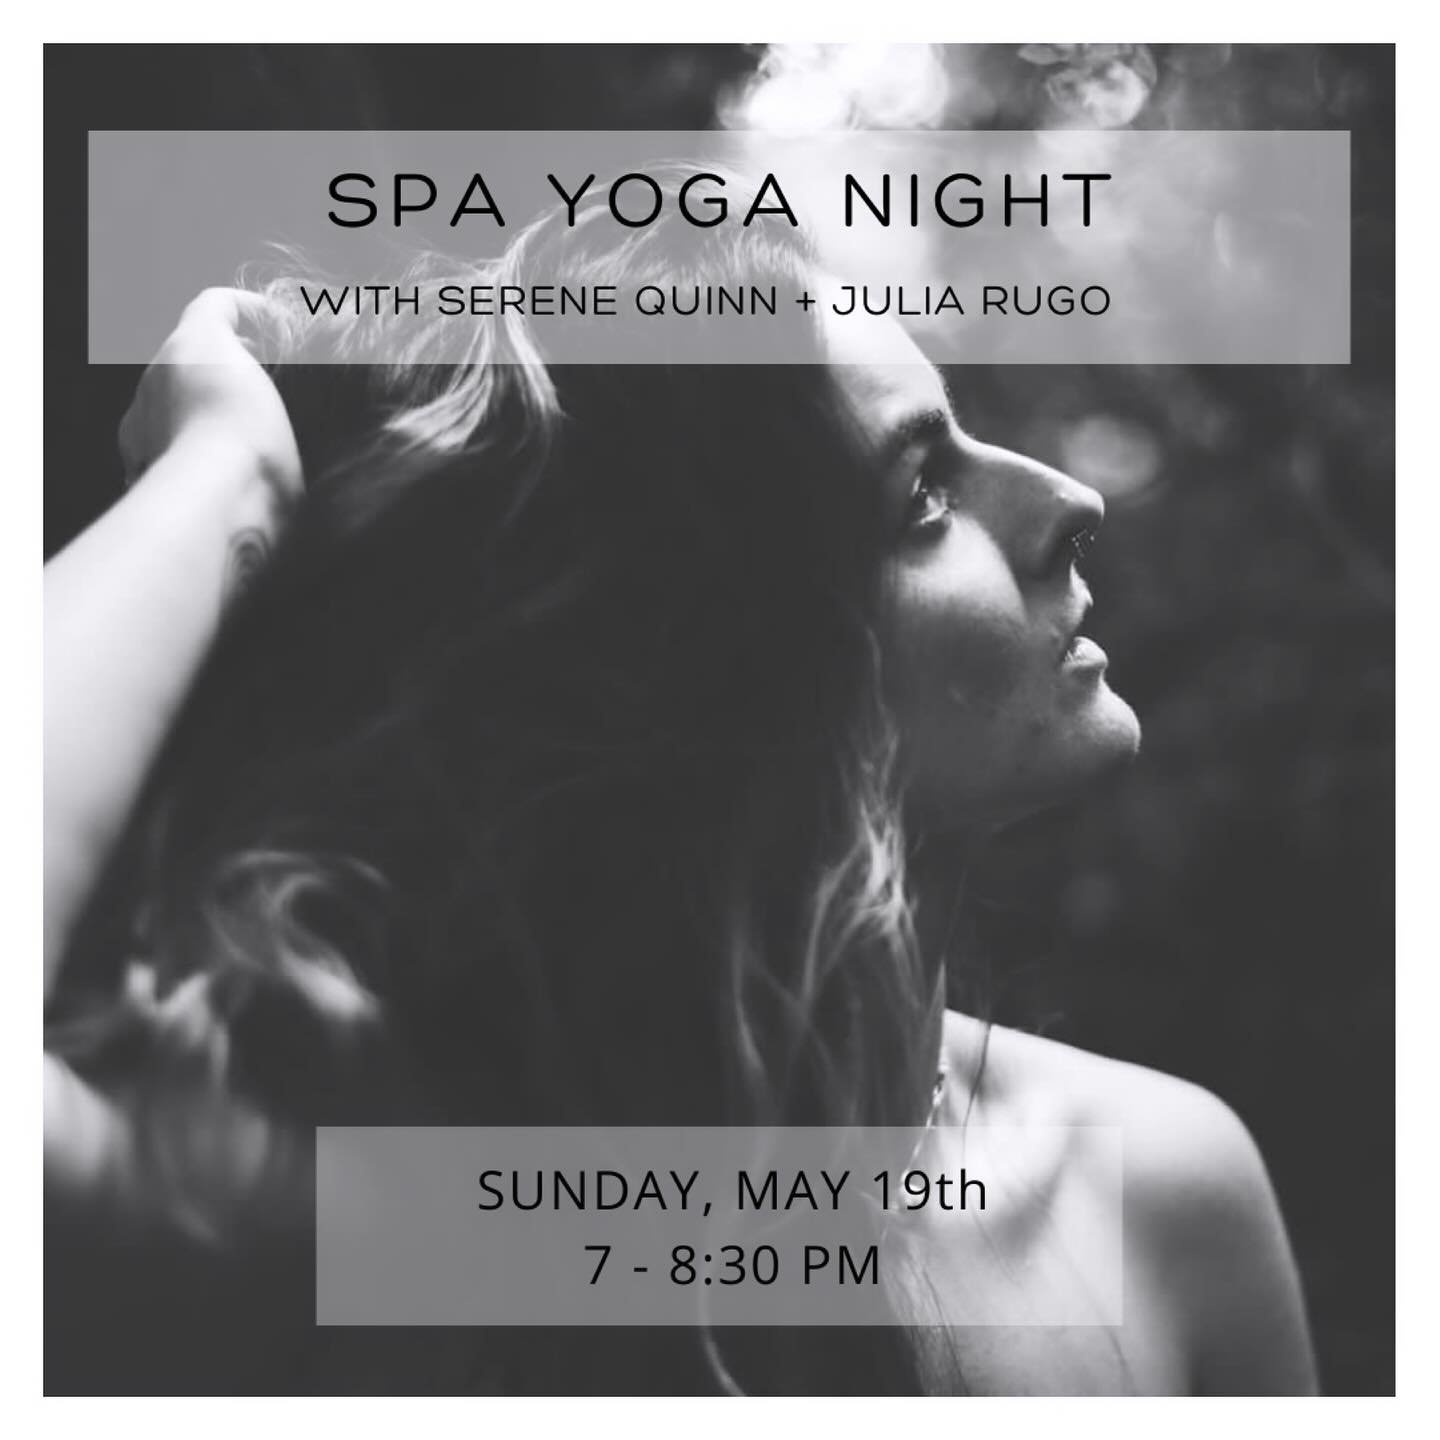 Our Spa Yoga Night with the gifted Serene and Julia is back next month, and it&rsquo;s already filling up! ✨

This nourishing and healing immersion of yoga, massage, aromatherapy &amp; sound healing gifts you a deeply peaceful and rejuvenating oasis 